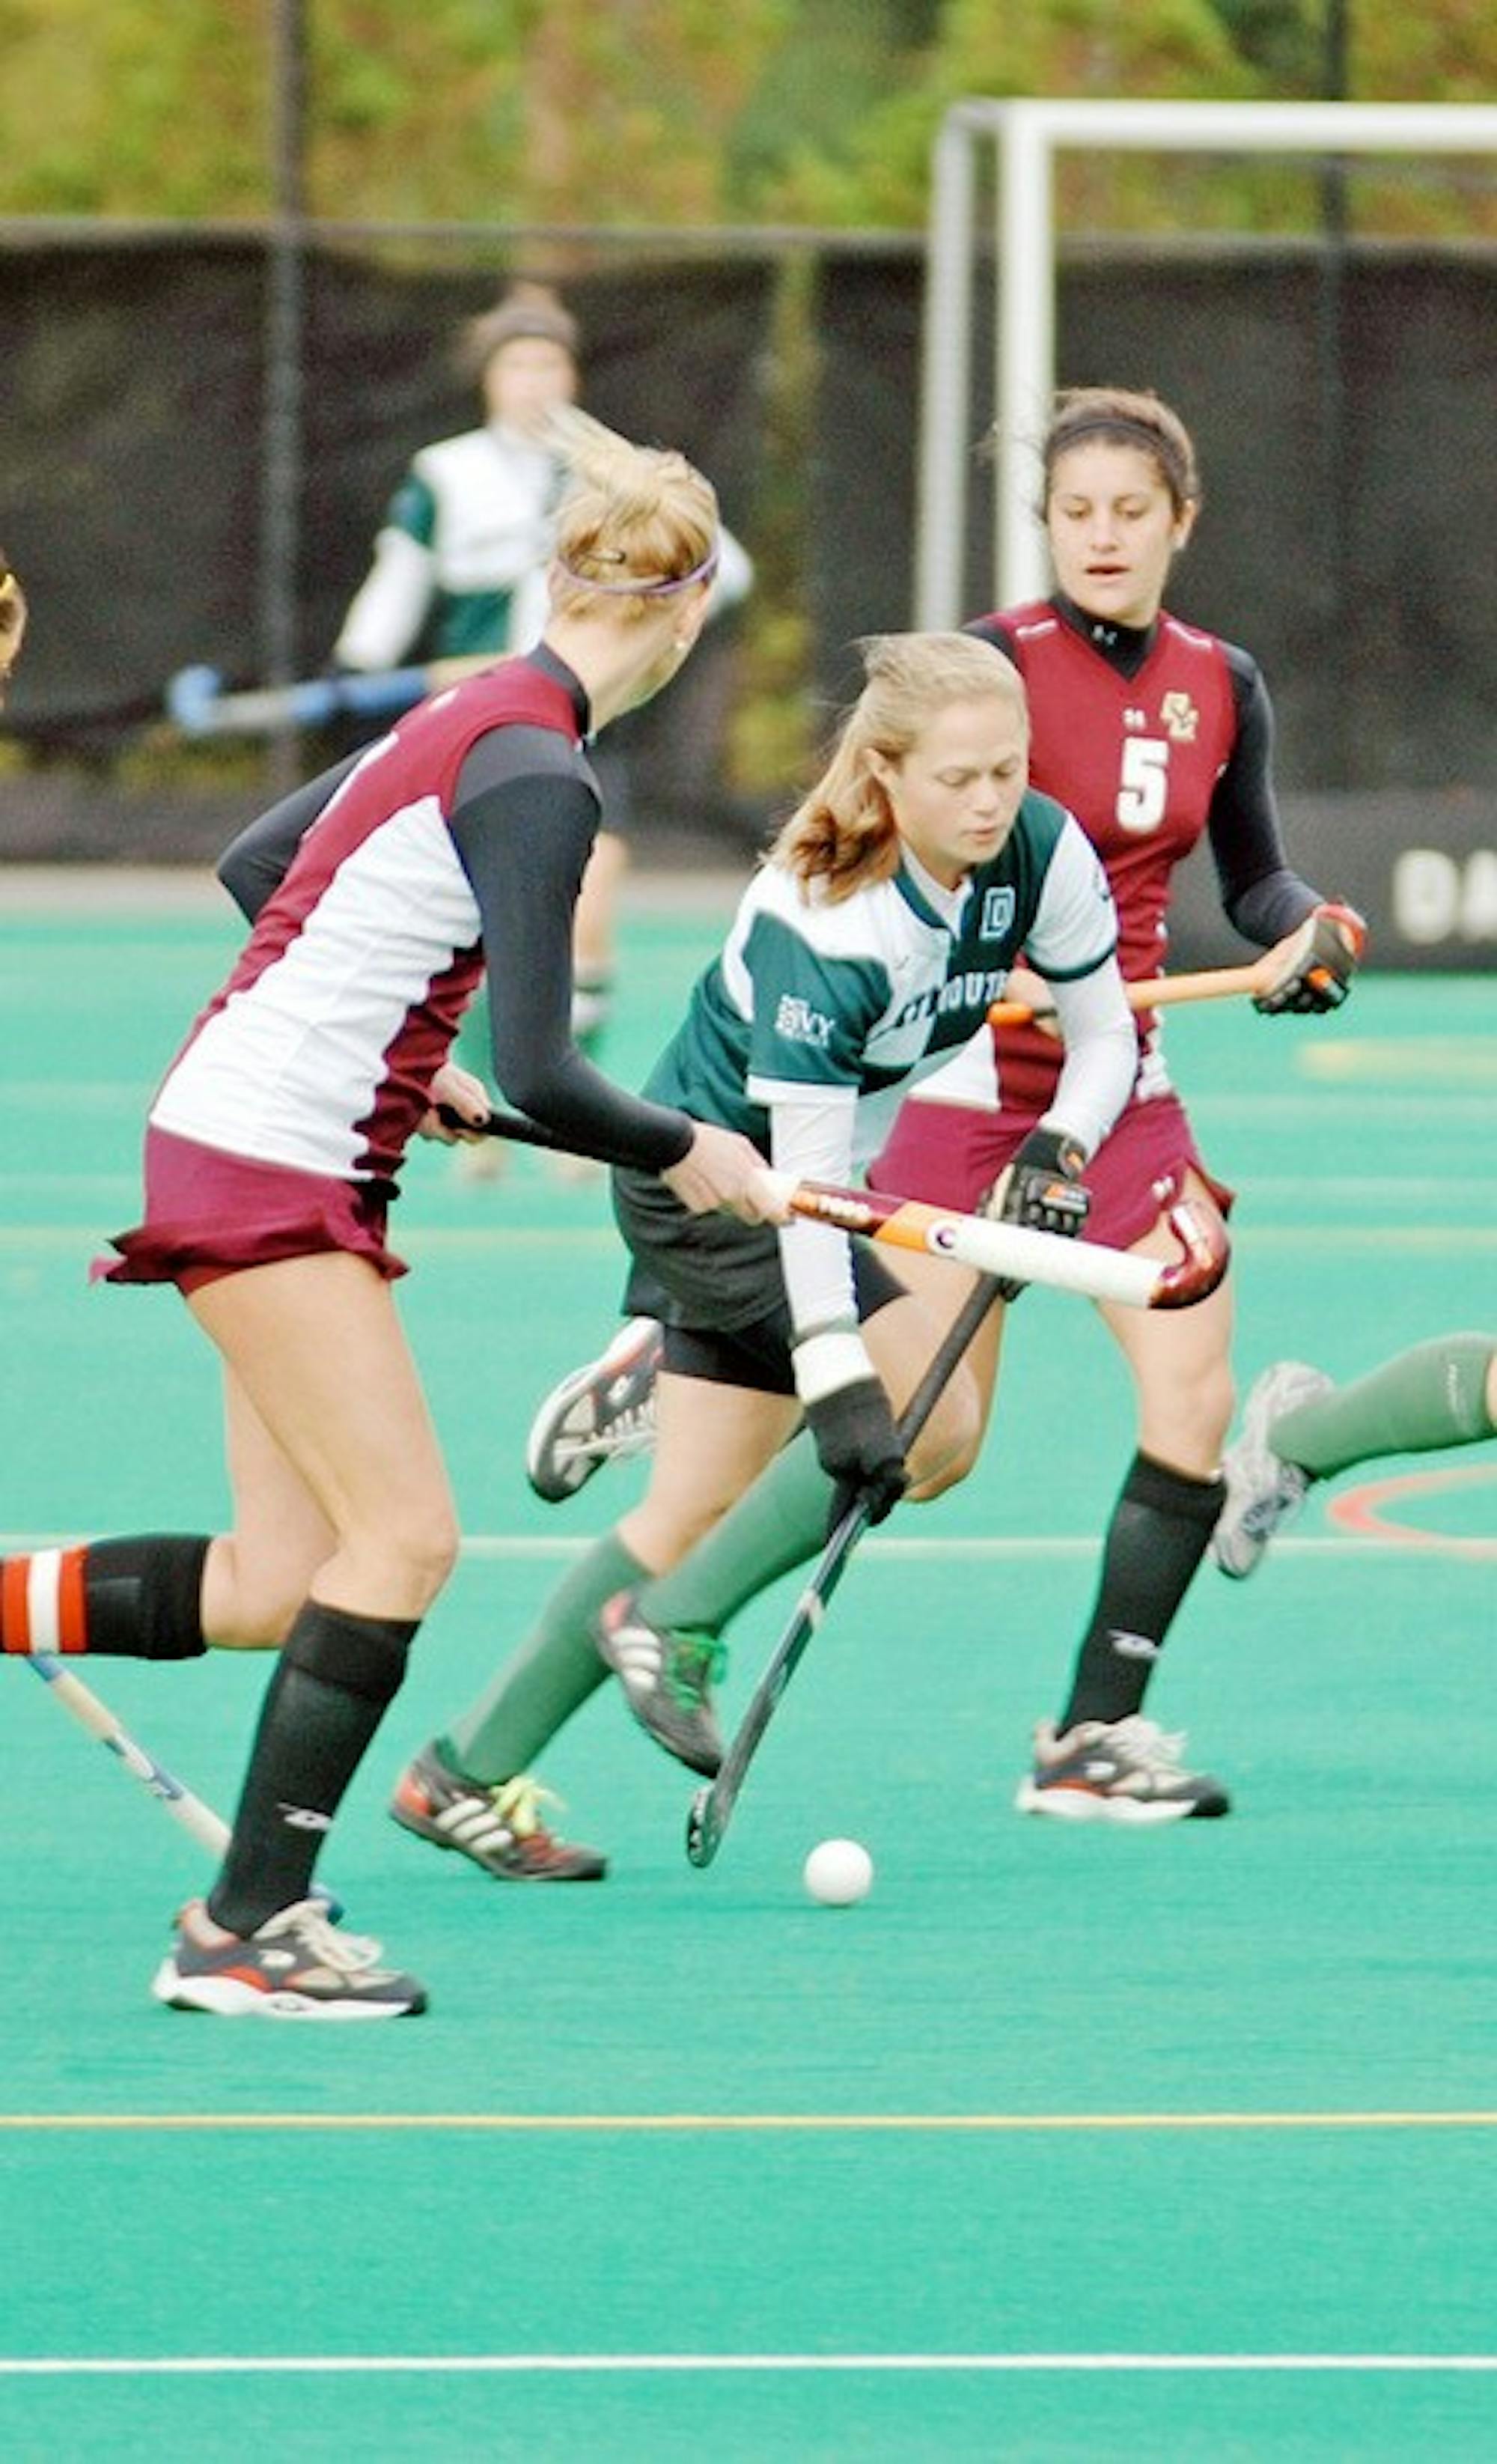 Allison Weinstock '10 maneuvers through the defense with the ball.